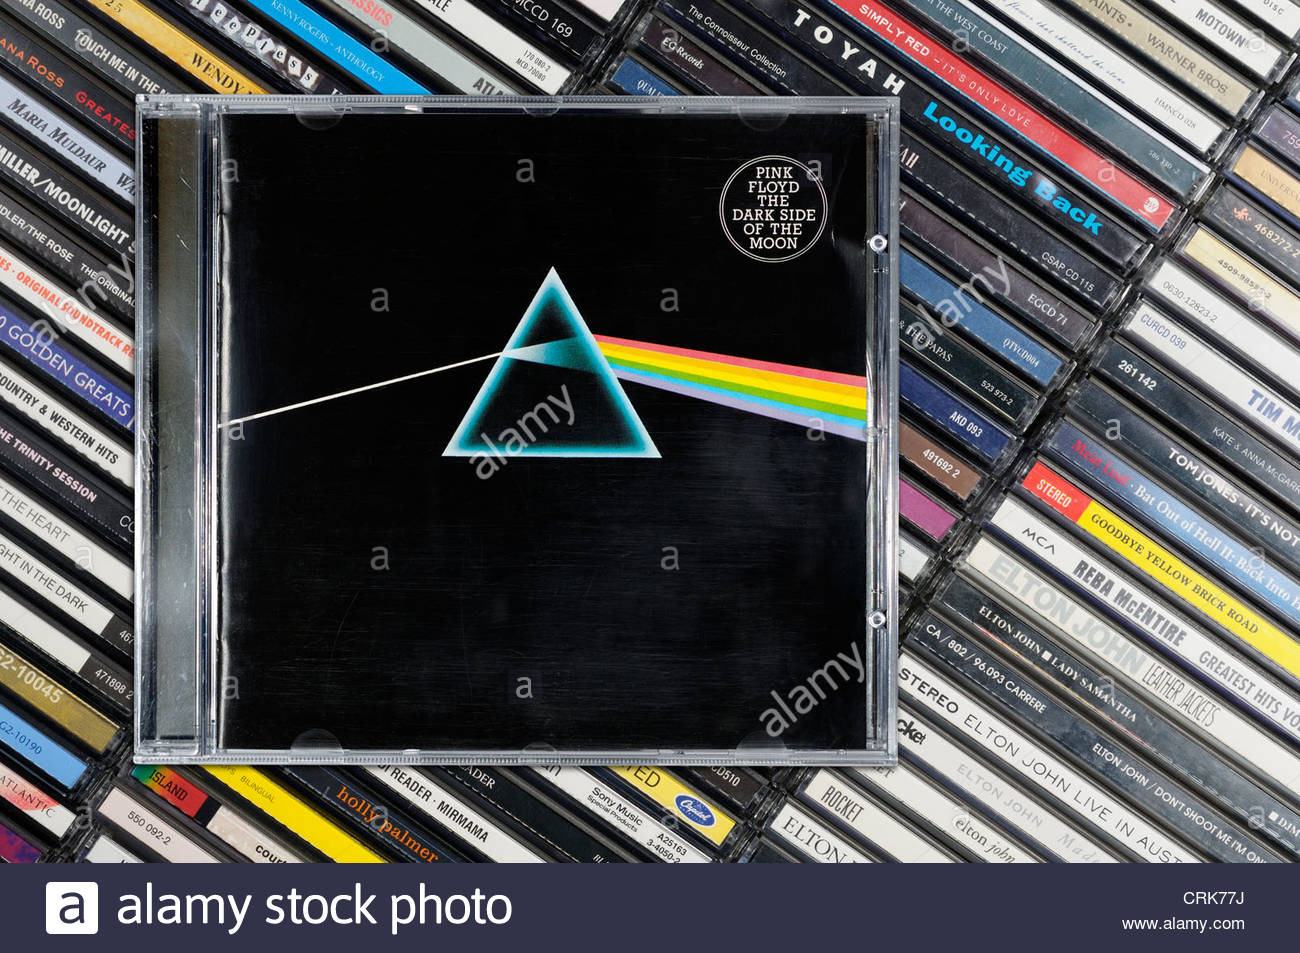 Pink Floyd album, Dark Side Of The Moon, piled music CD cases Stock Photo -  Alamy